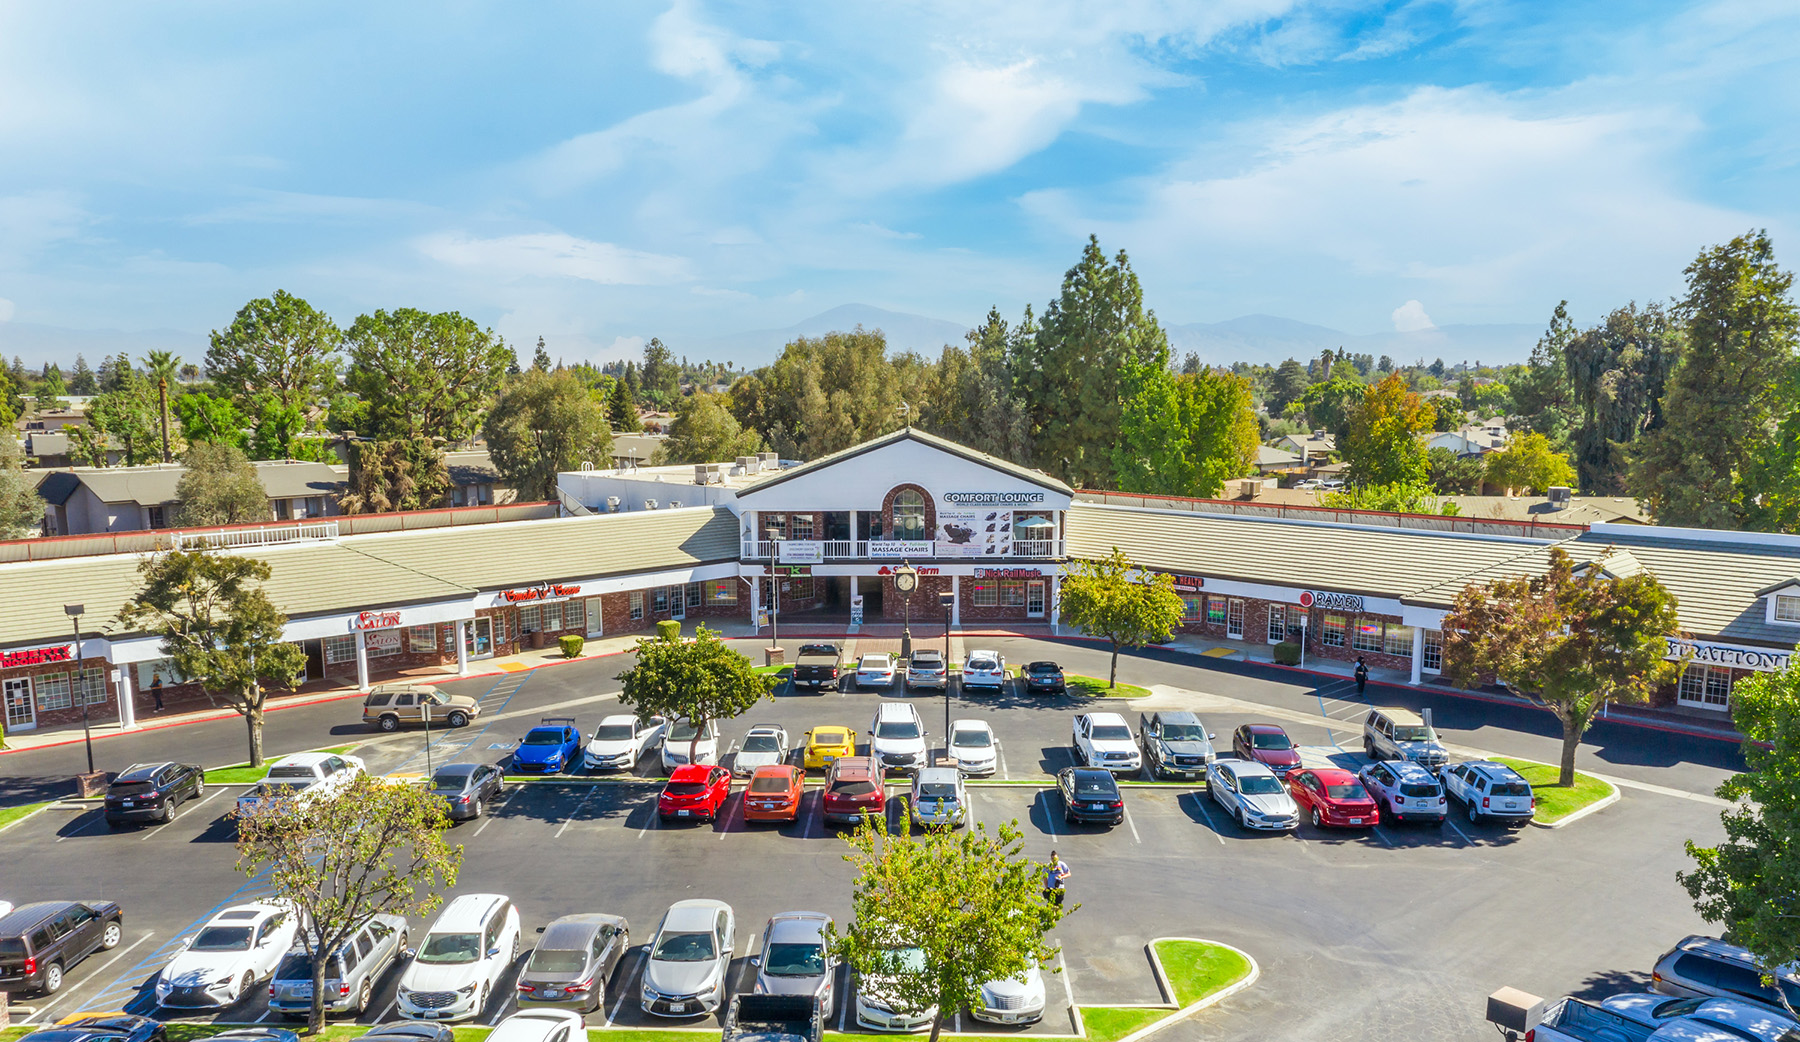 Hanley Investment Group Arranges Sale of 41,238 SF Shopping Center in Bakersfield, Calif. for $10.1 Million